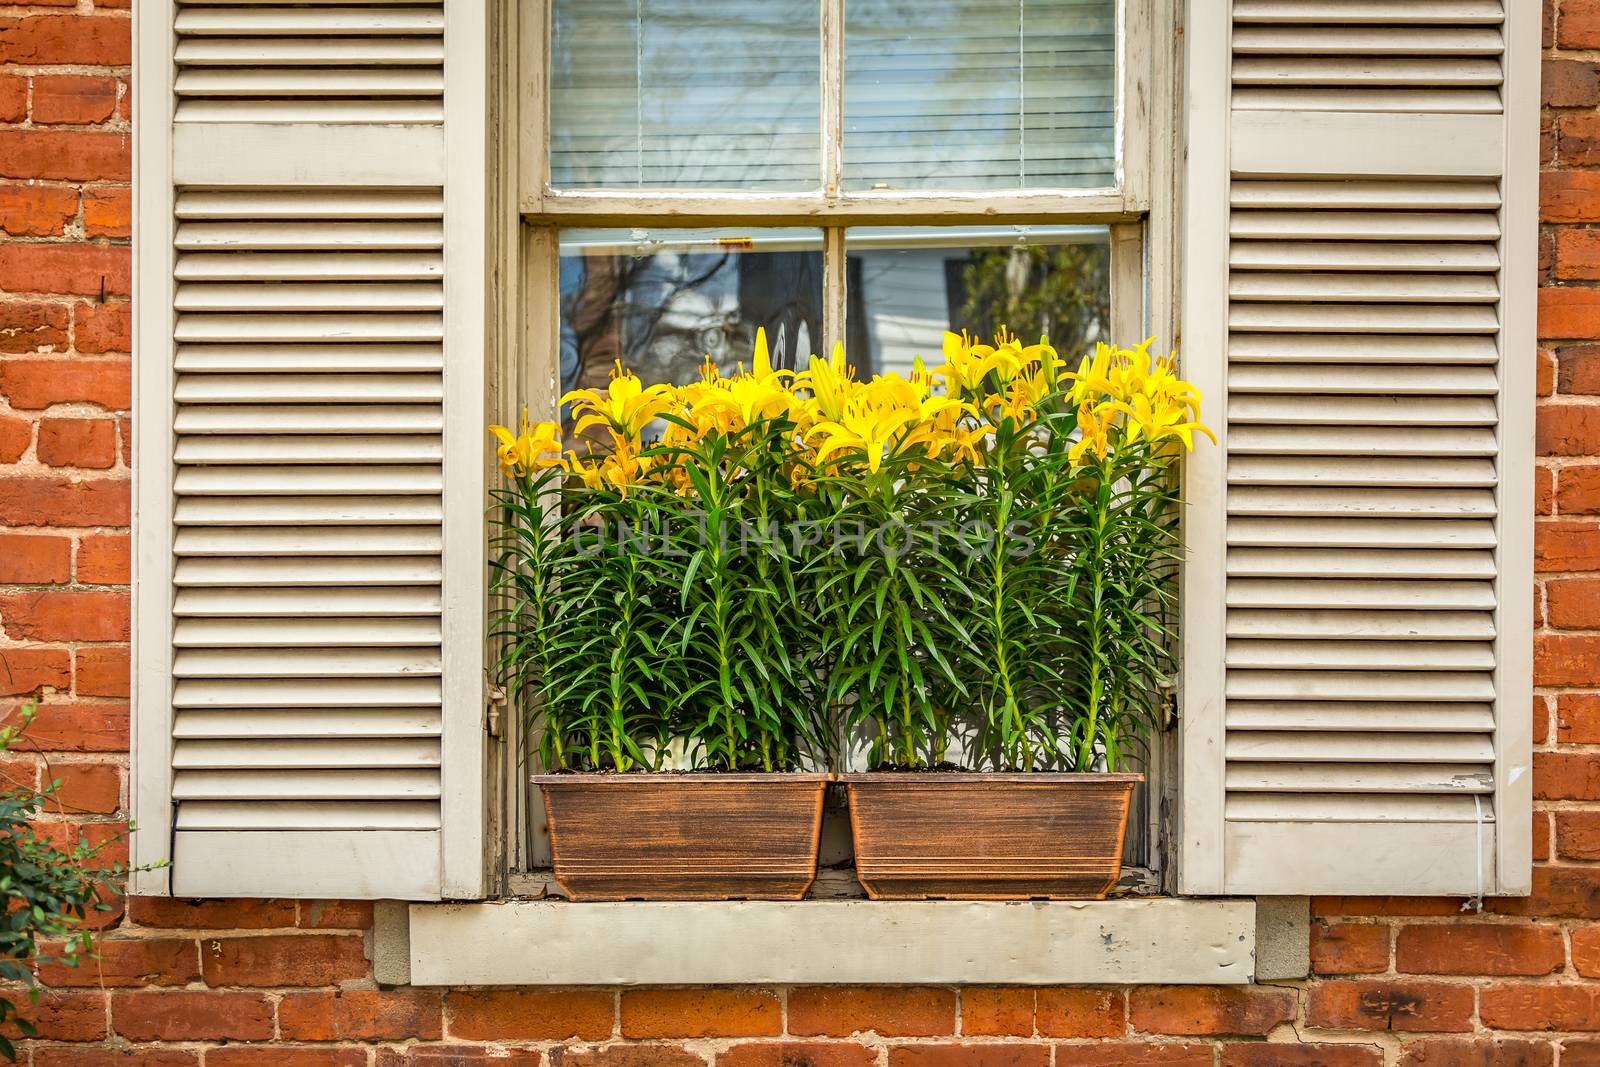 The Window Box by adifferentbrian